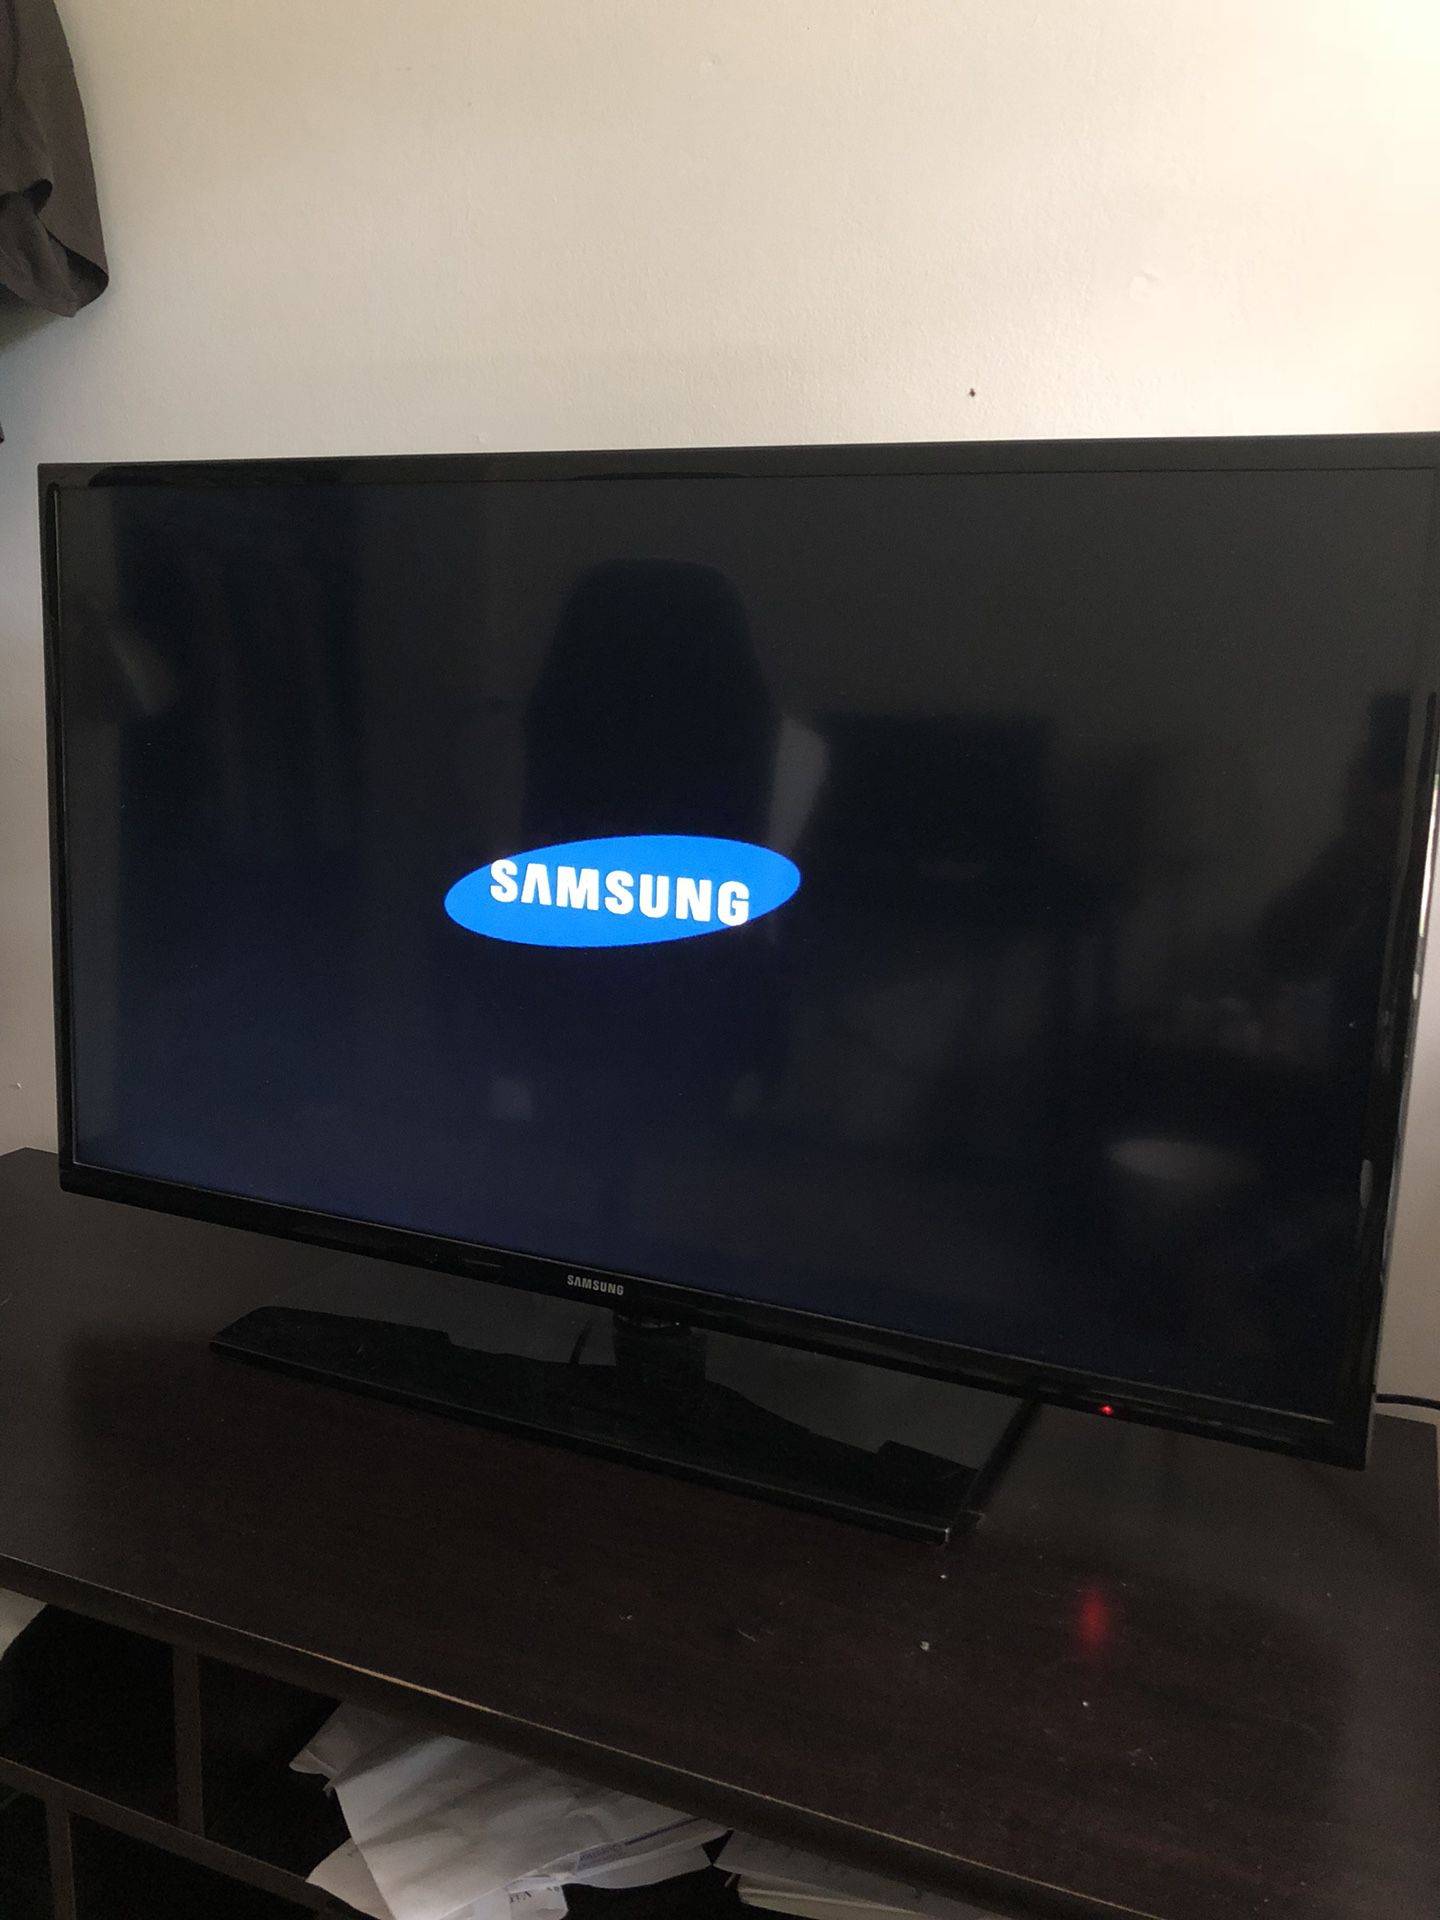 Samsung TV 40 inch as good as new with remote control